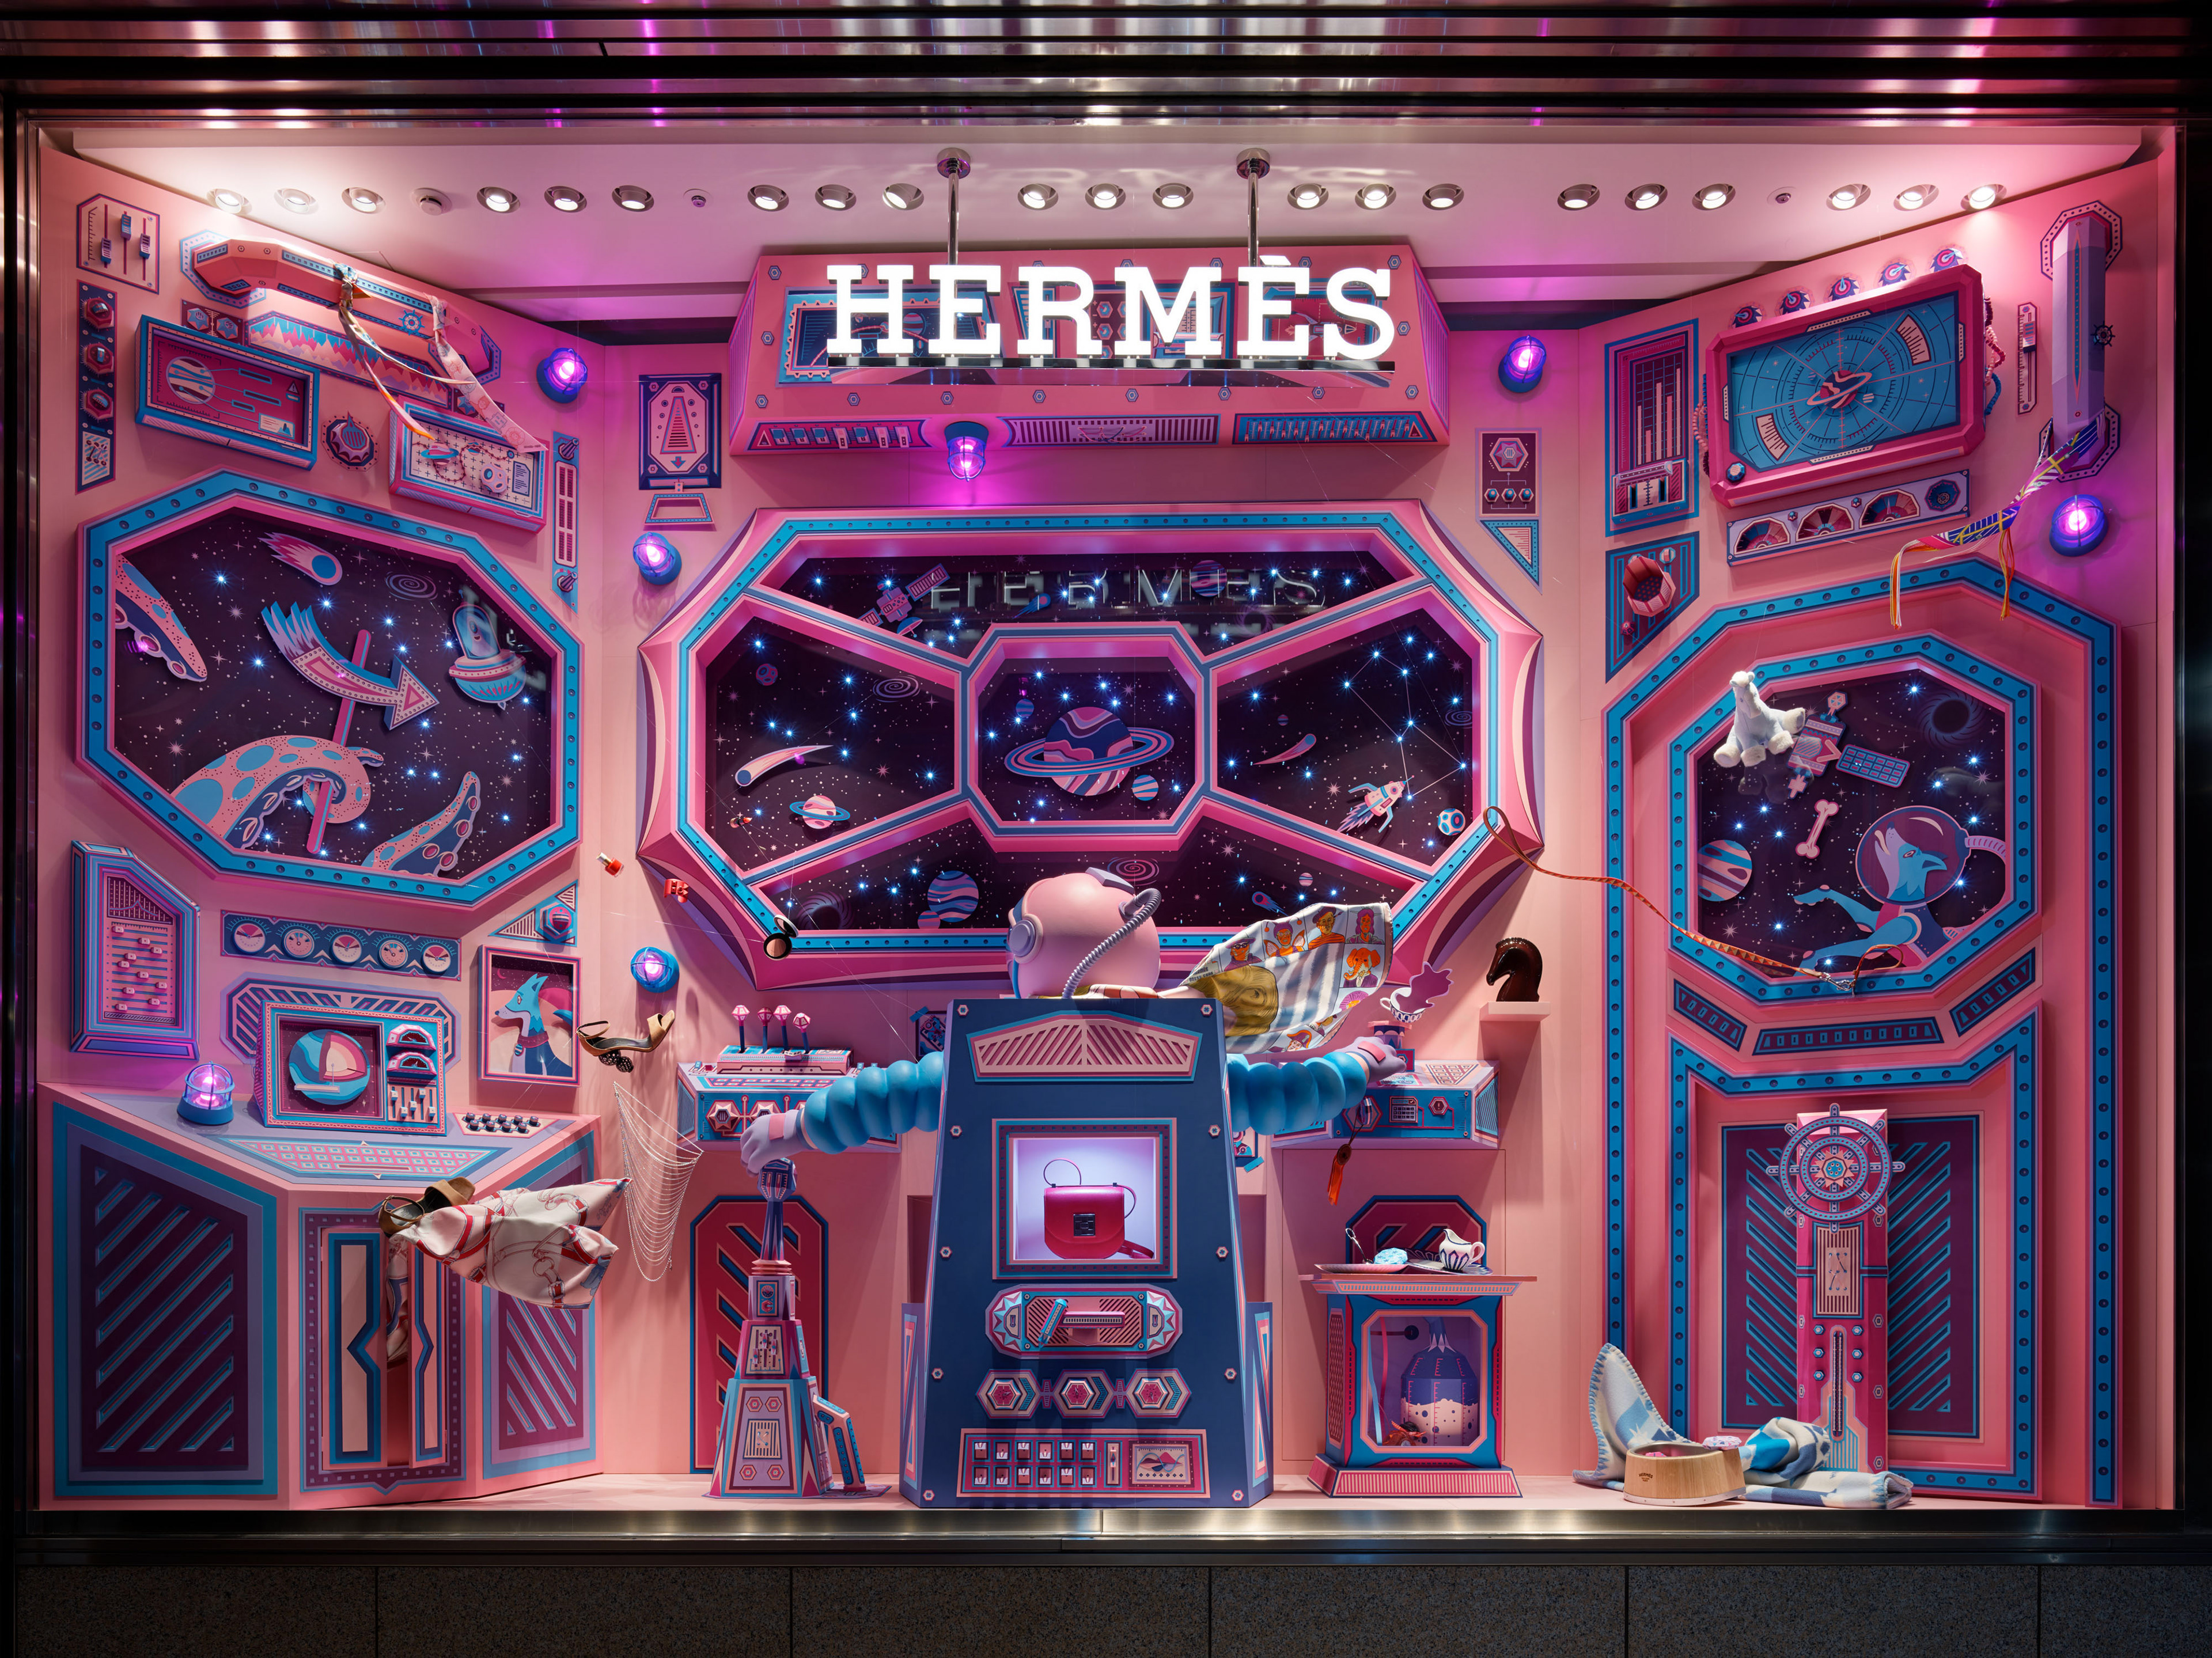 zim & zou fills Hermès' cabinet of curiosities with leather creatures